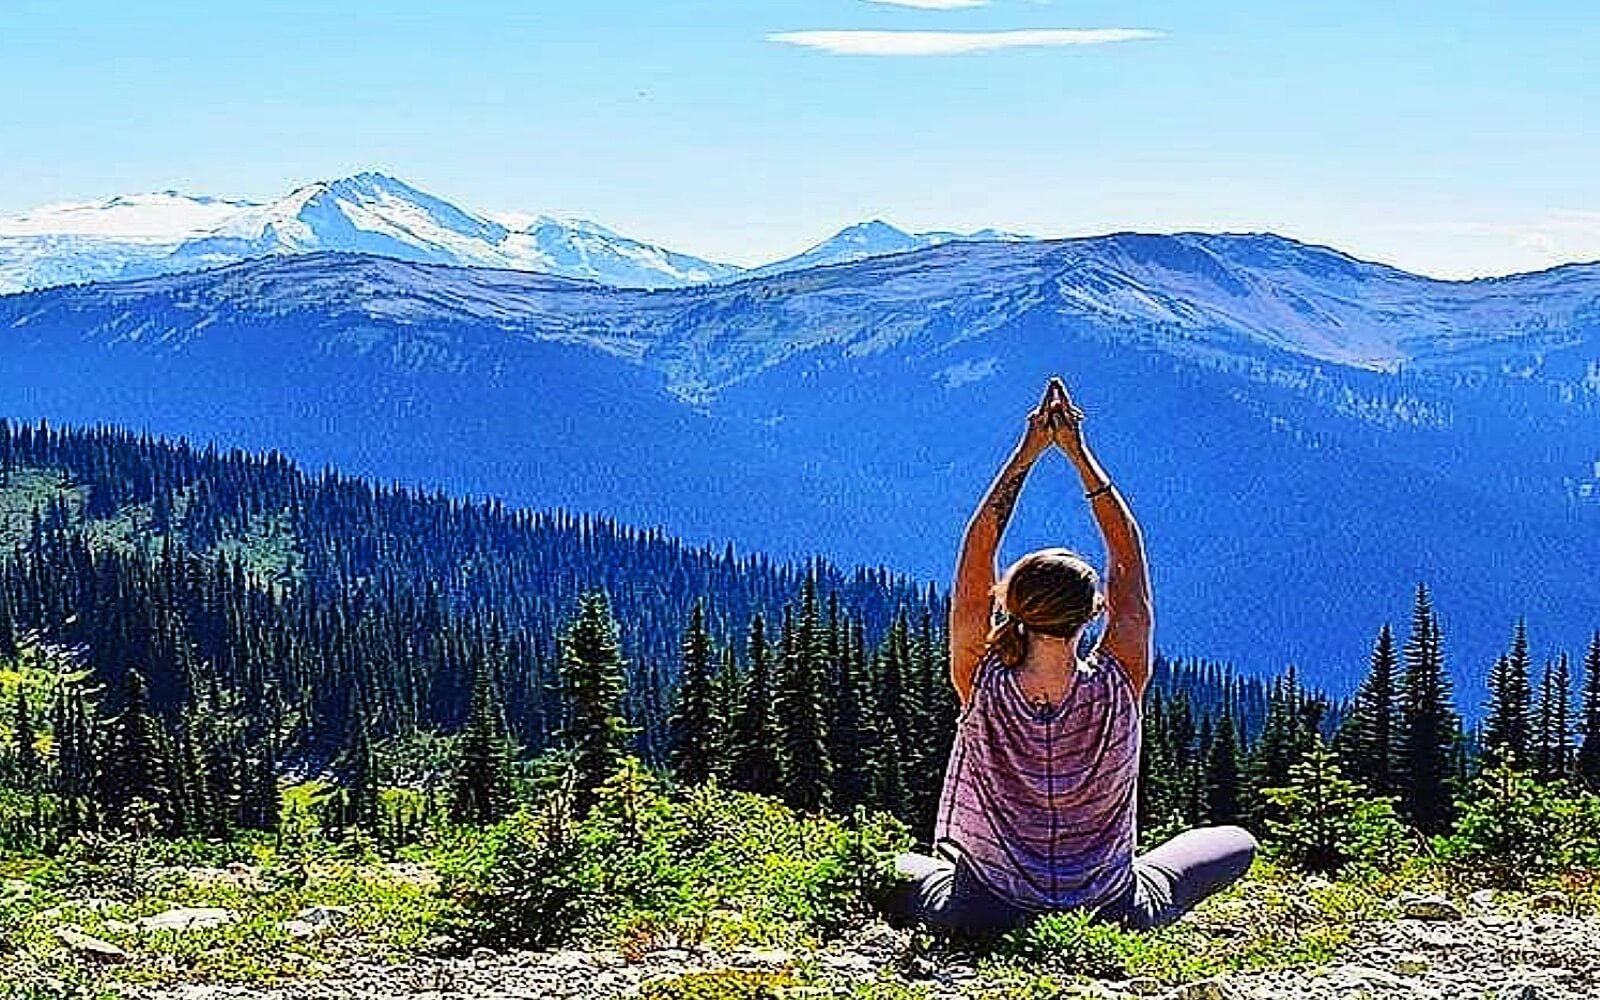 A woman does yoga in the mountains